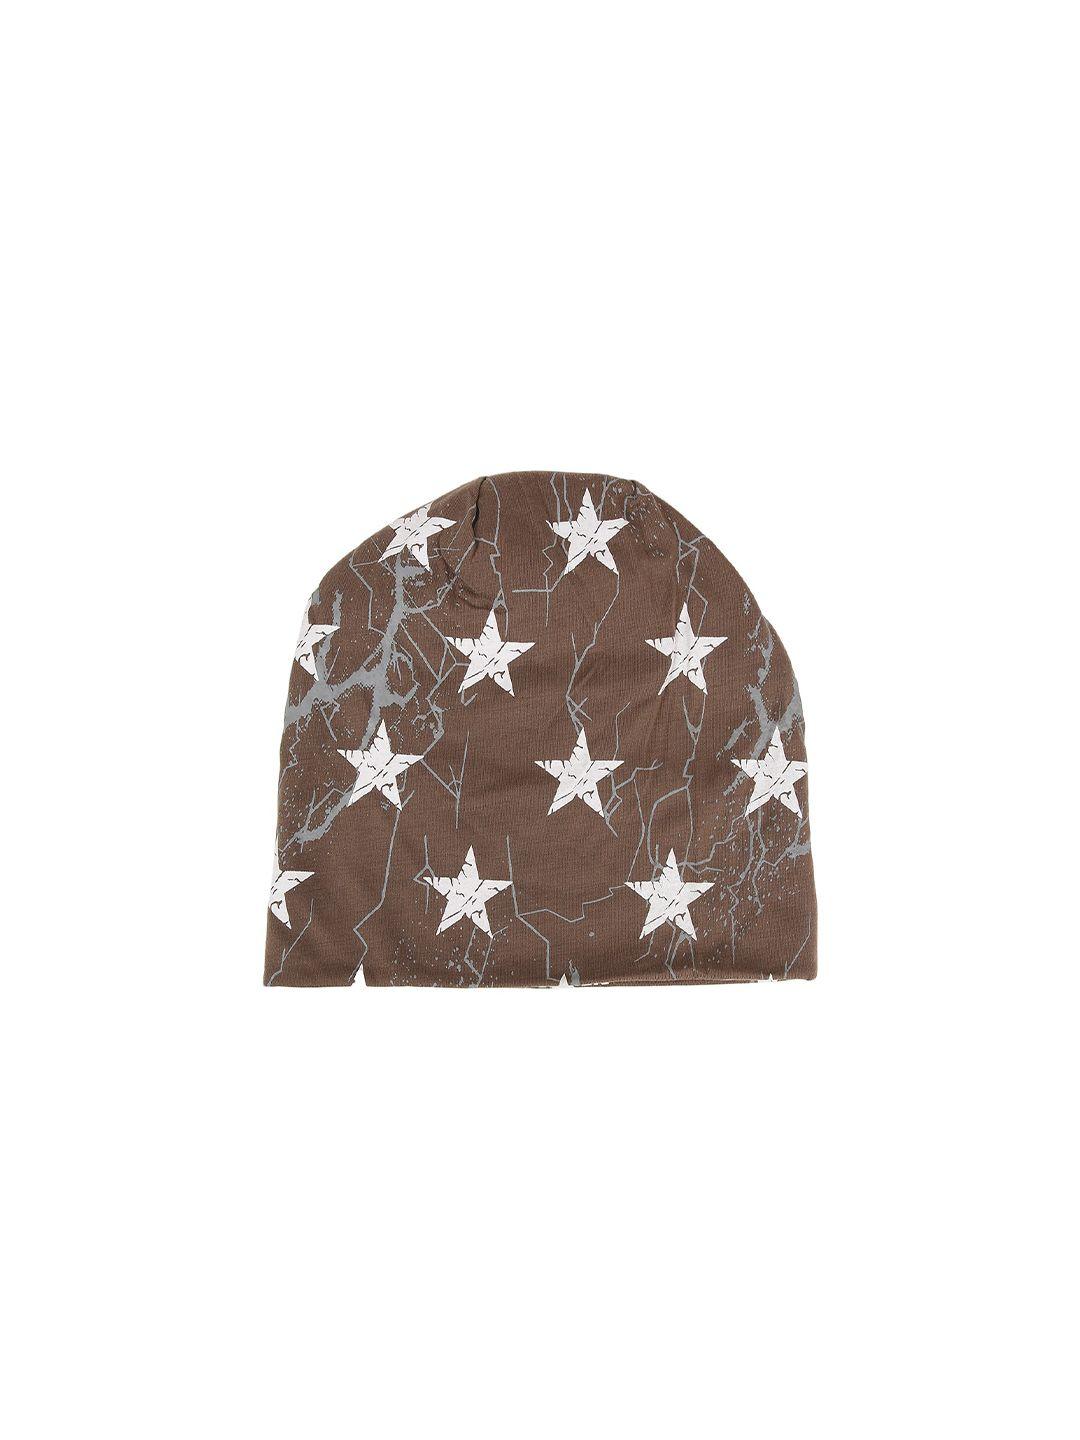 isweven unisex brown & white cotton printed beanie